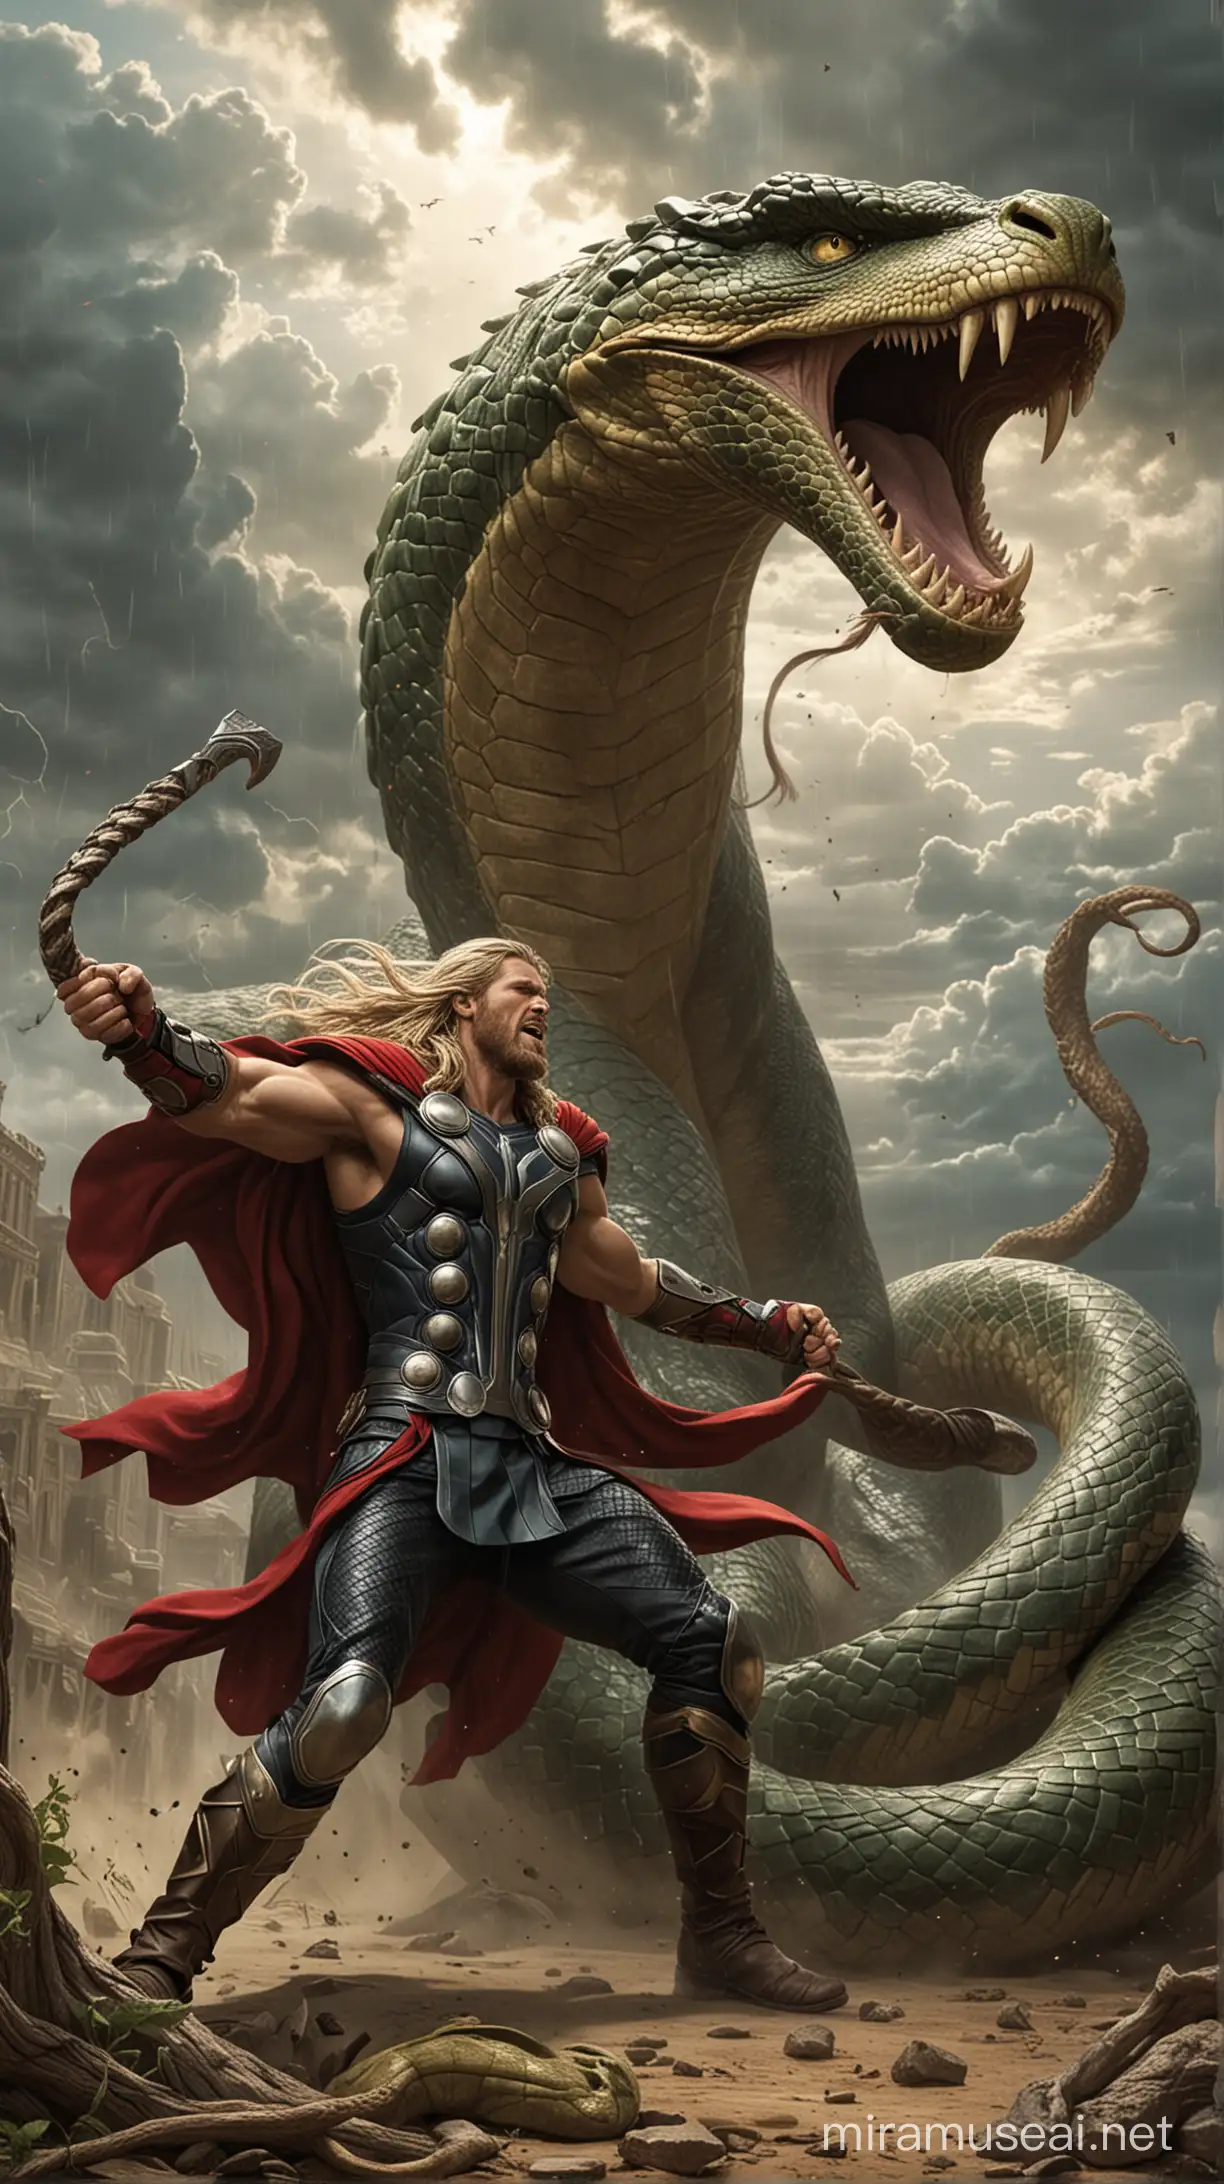 Thor Battles a Monstrous Serpent in Epic Confrontation